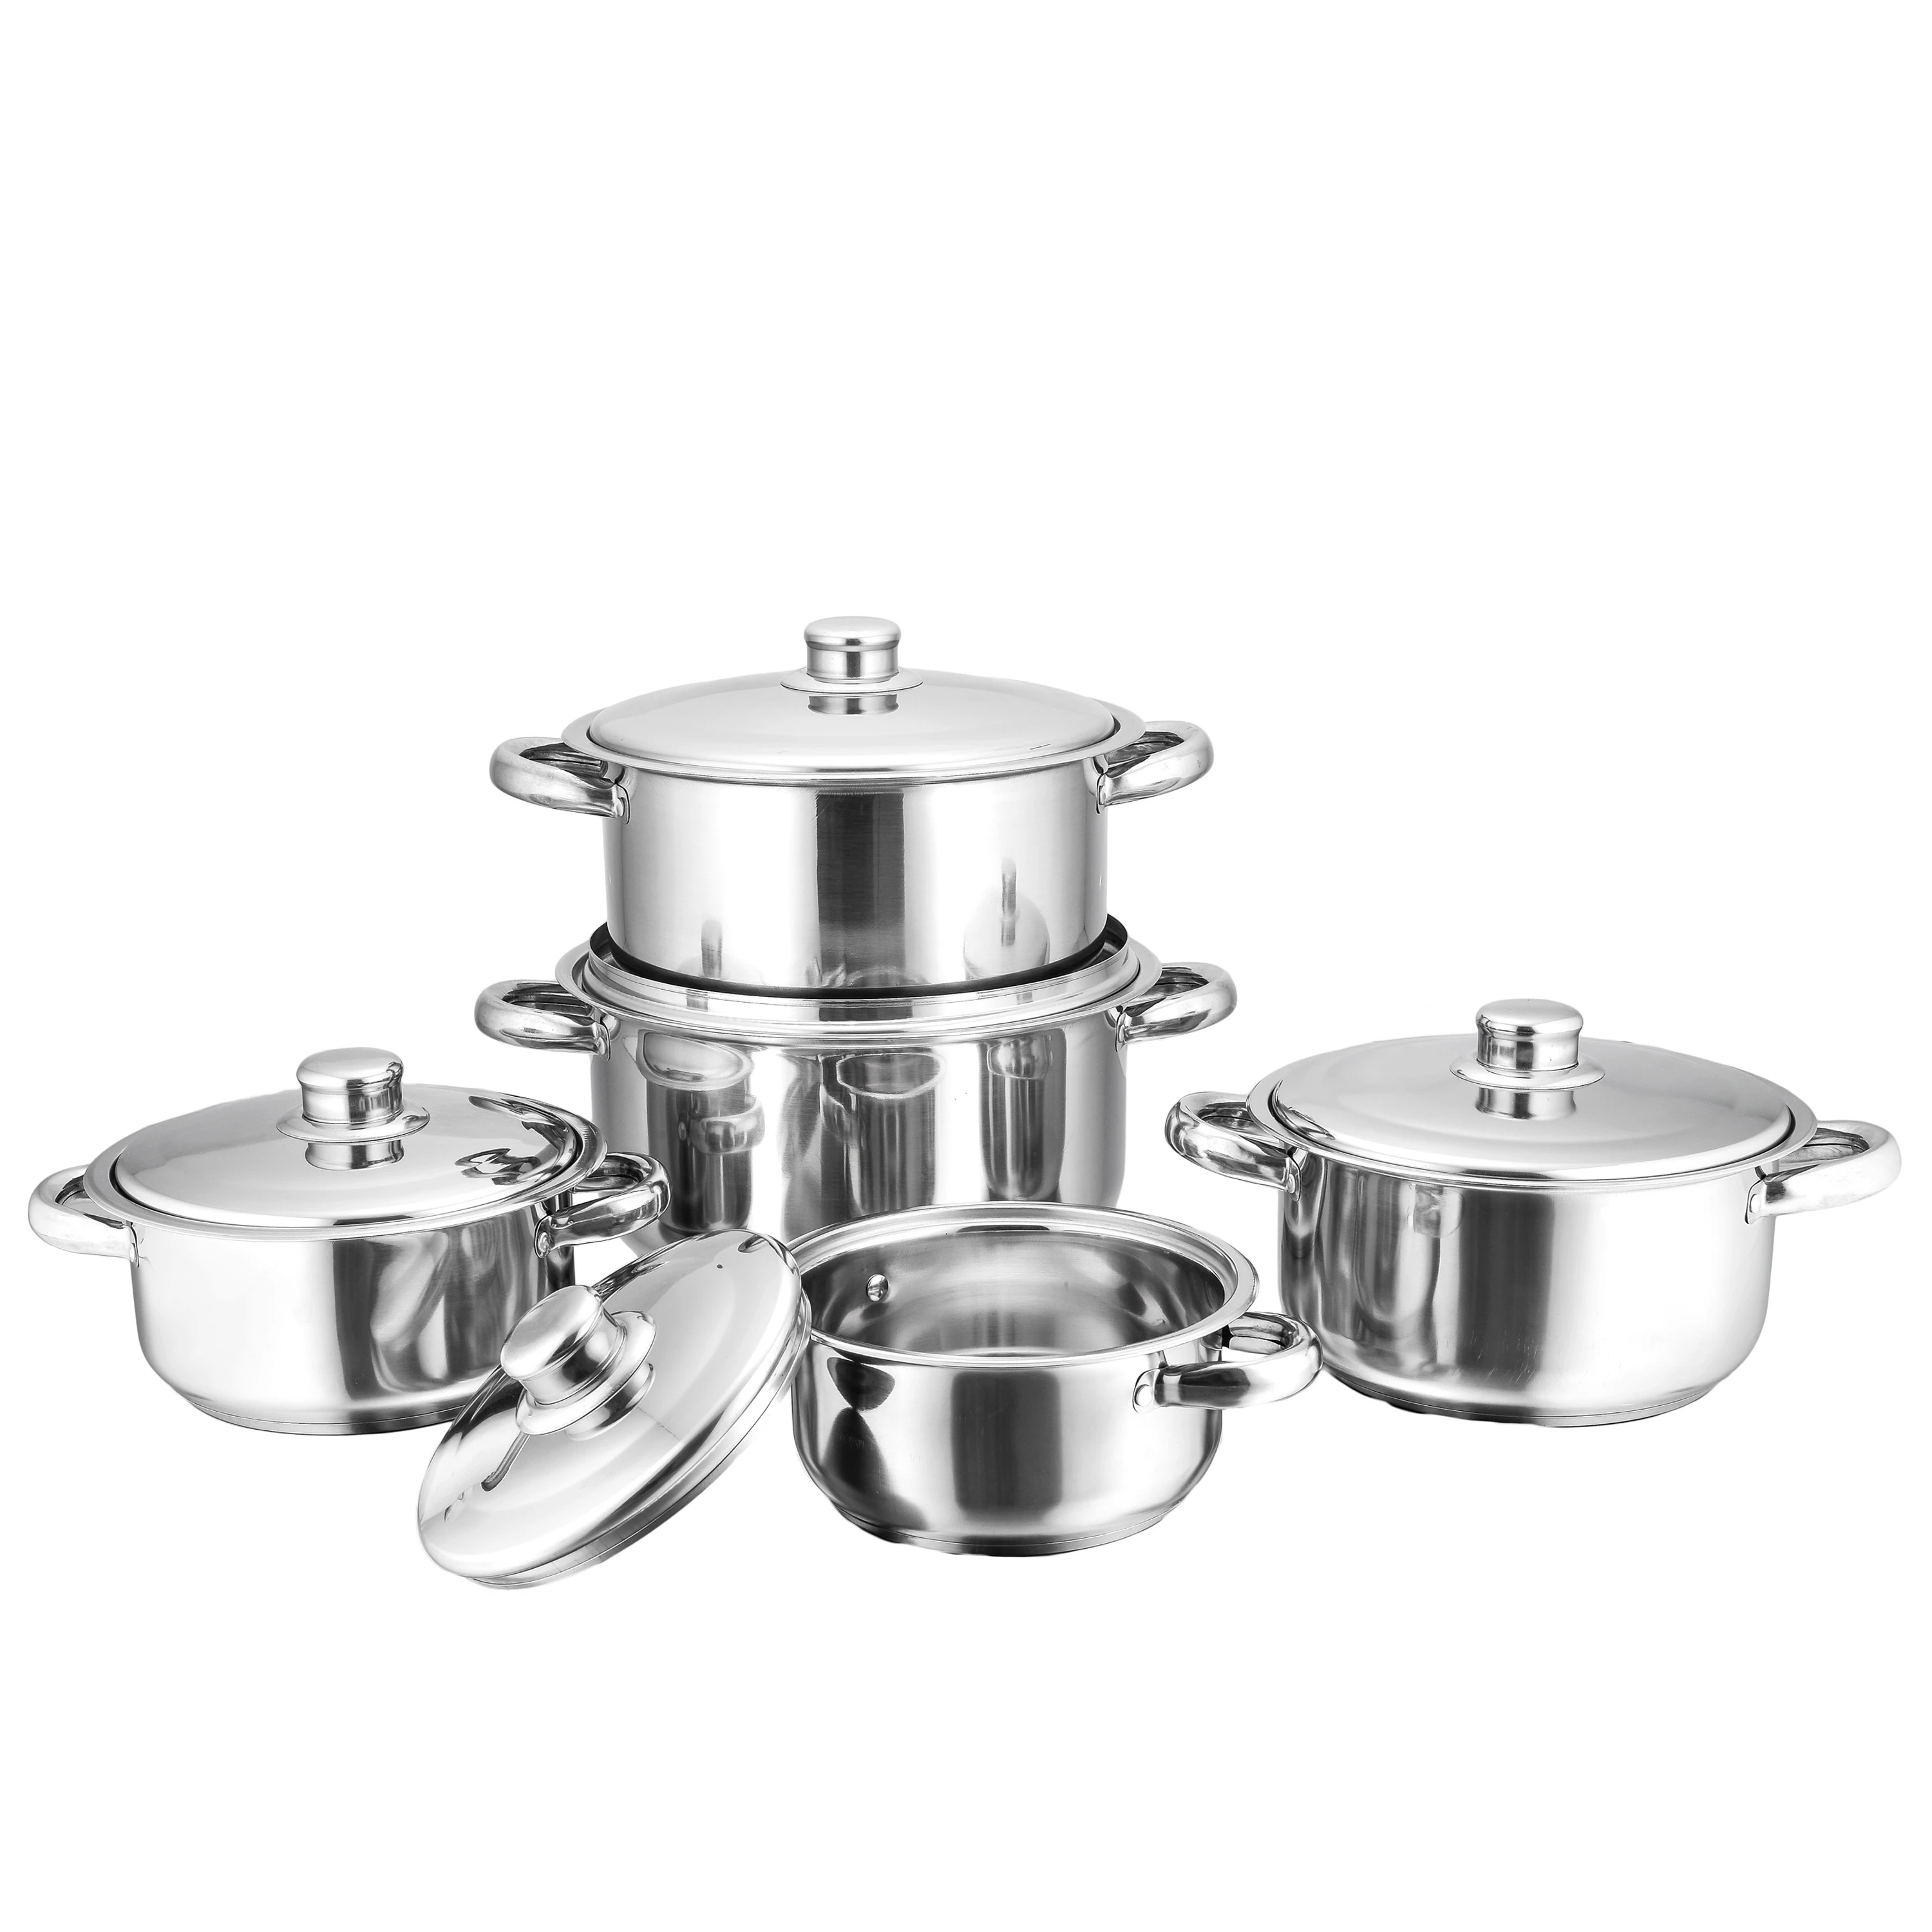 mirror polishing 10 pcs stainless steel induction soup pot cookware set